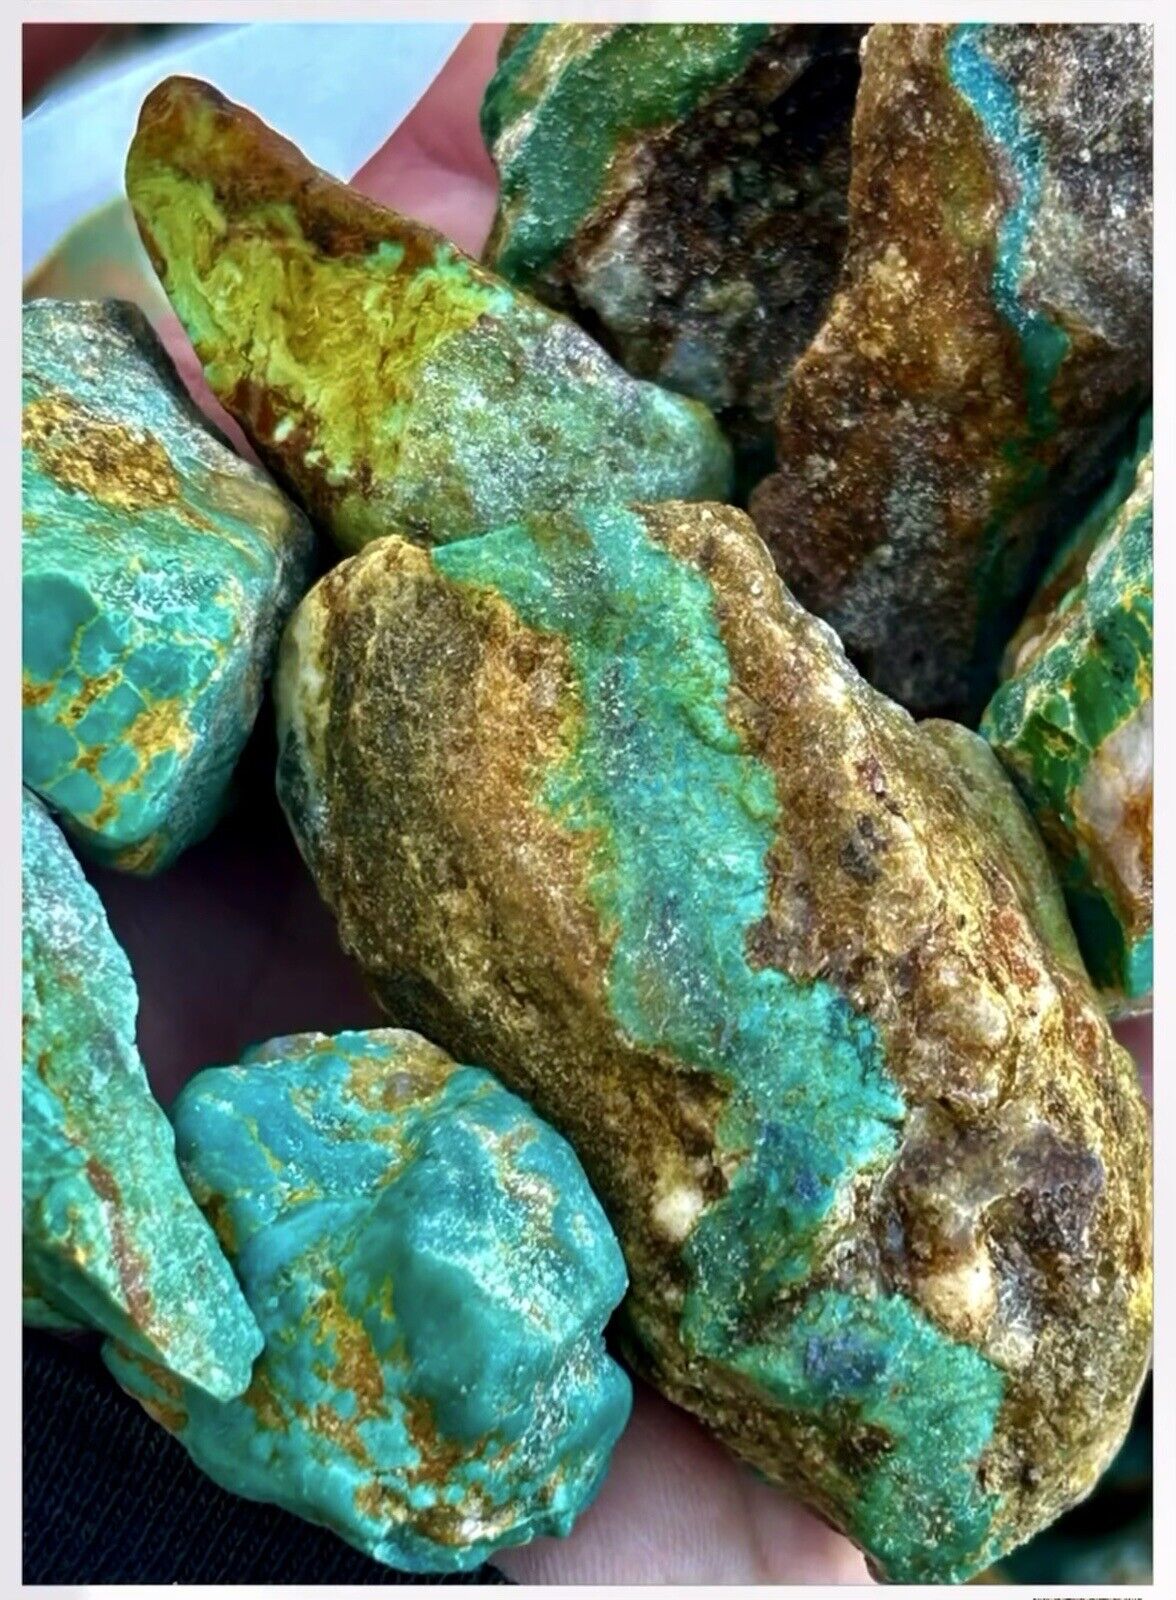 Old Hardy Pit Turquoise circa 1960. Excellent Quality. 1/4 Pound. Almost Gone.